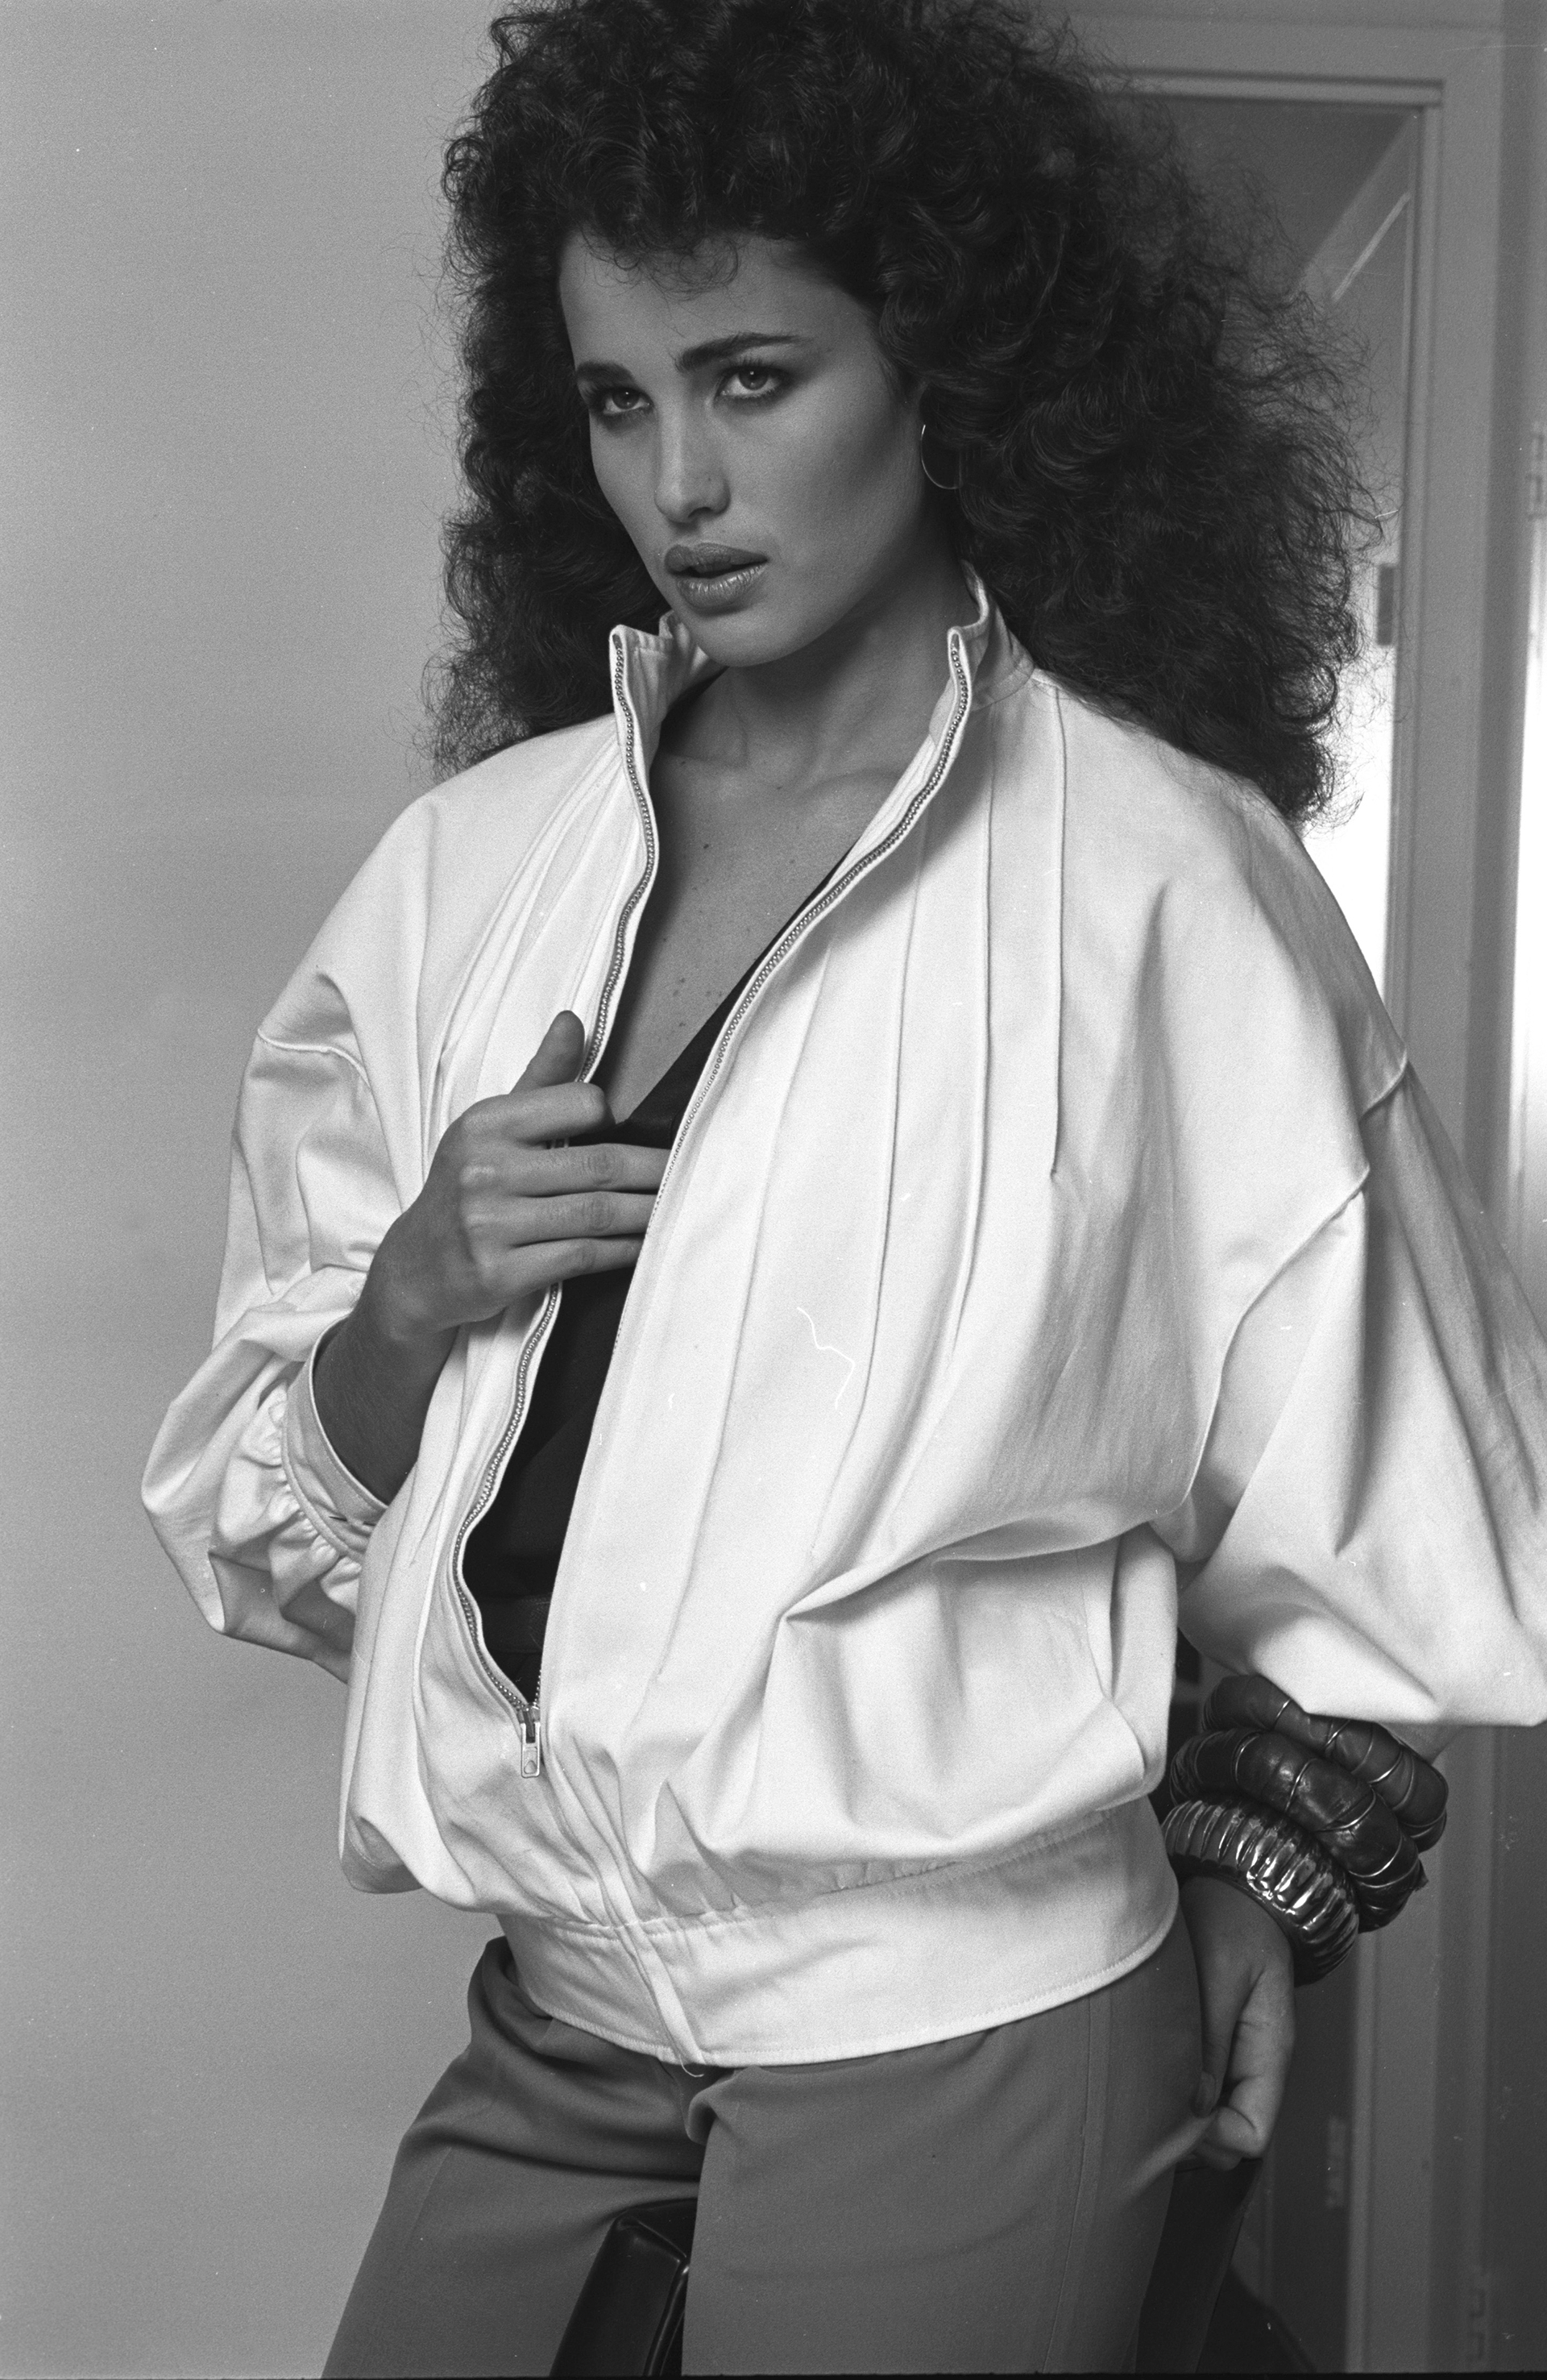 Portrait of American model and future actress Andie MacDowell (born Rosalie Anderson MacDowell) as she poses in a short jacket during a photoshoot for US Vogue magazine, early 1980s. (Photo by Andrea Blanch/Getty Images)